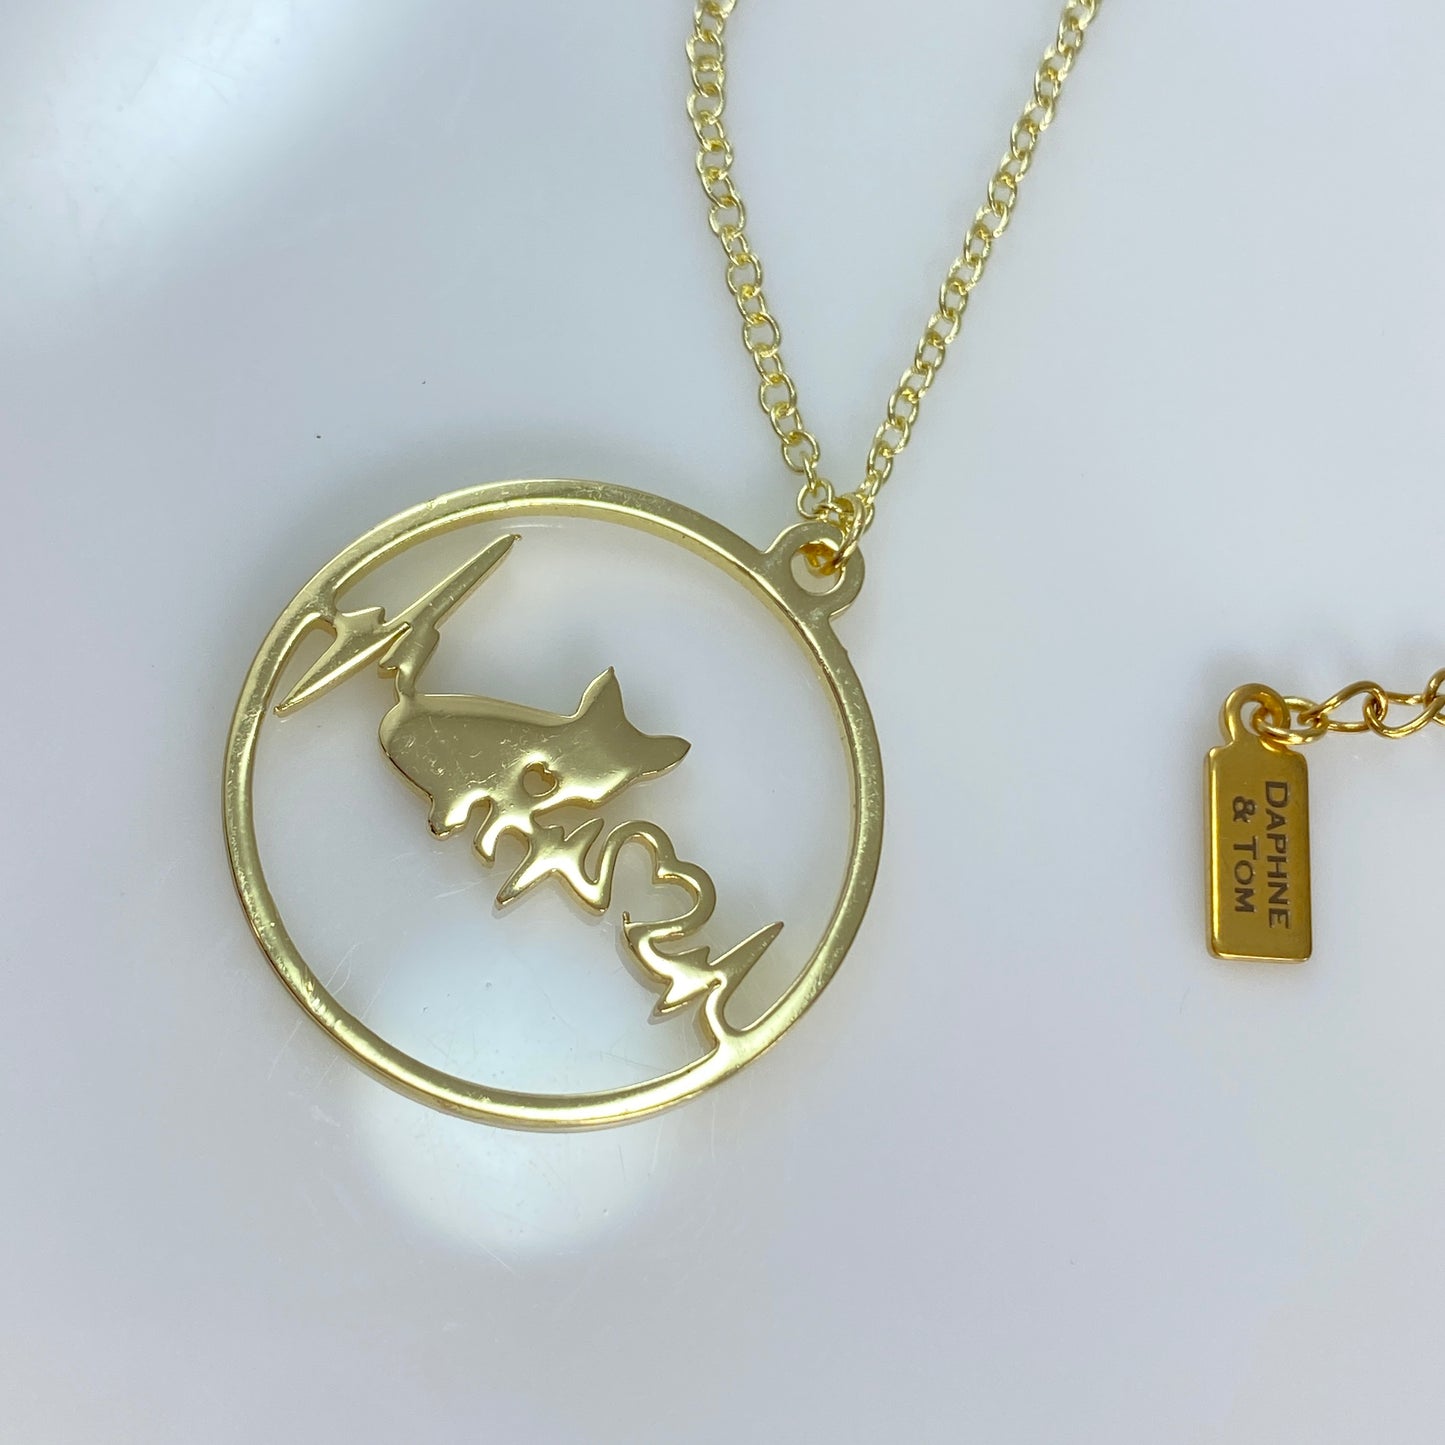 18 kt Gold Plated or Silver Dog Heartbeat & Heart with Birthstone Pendant Cable Chain Necklace Stainless Steel